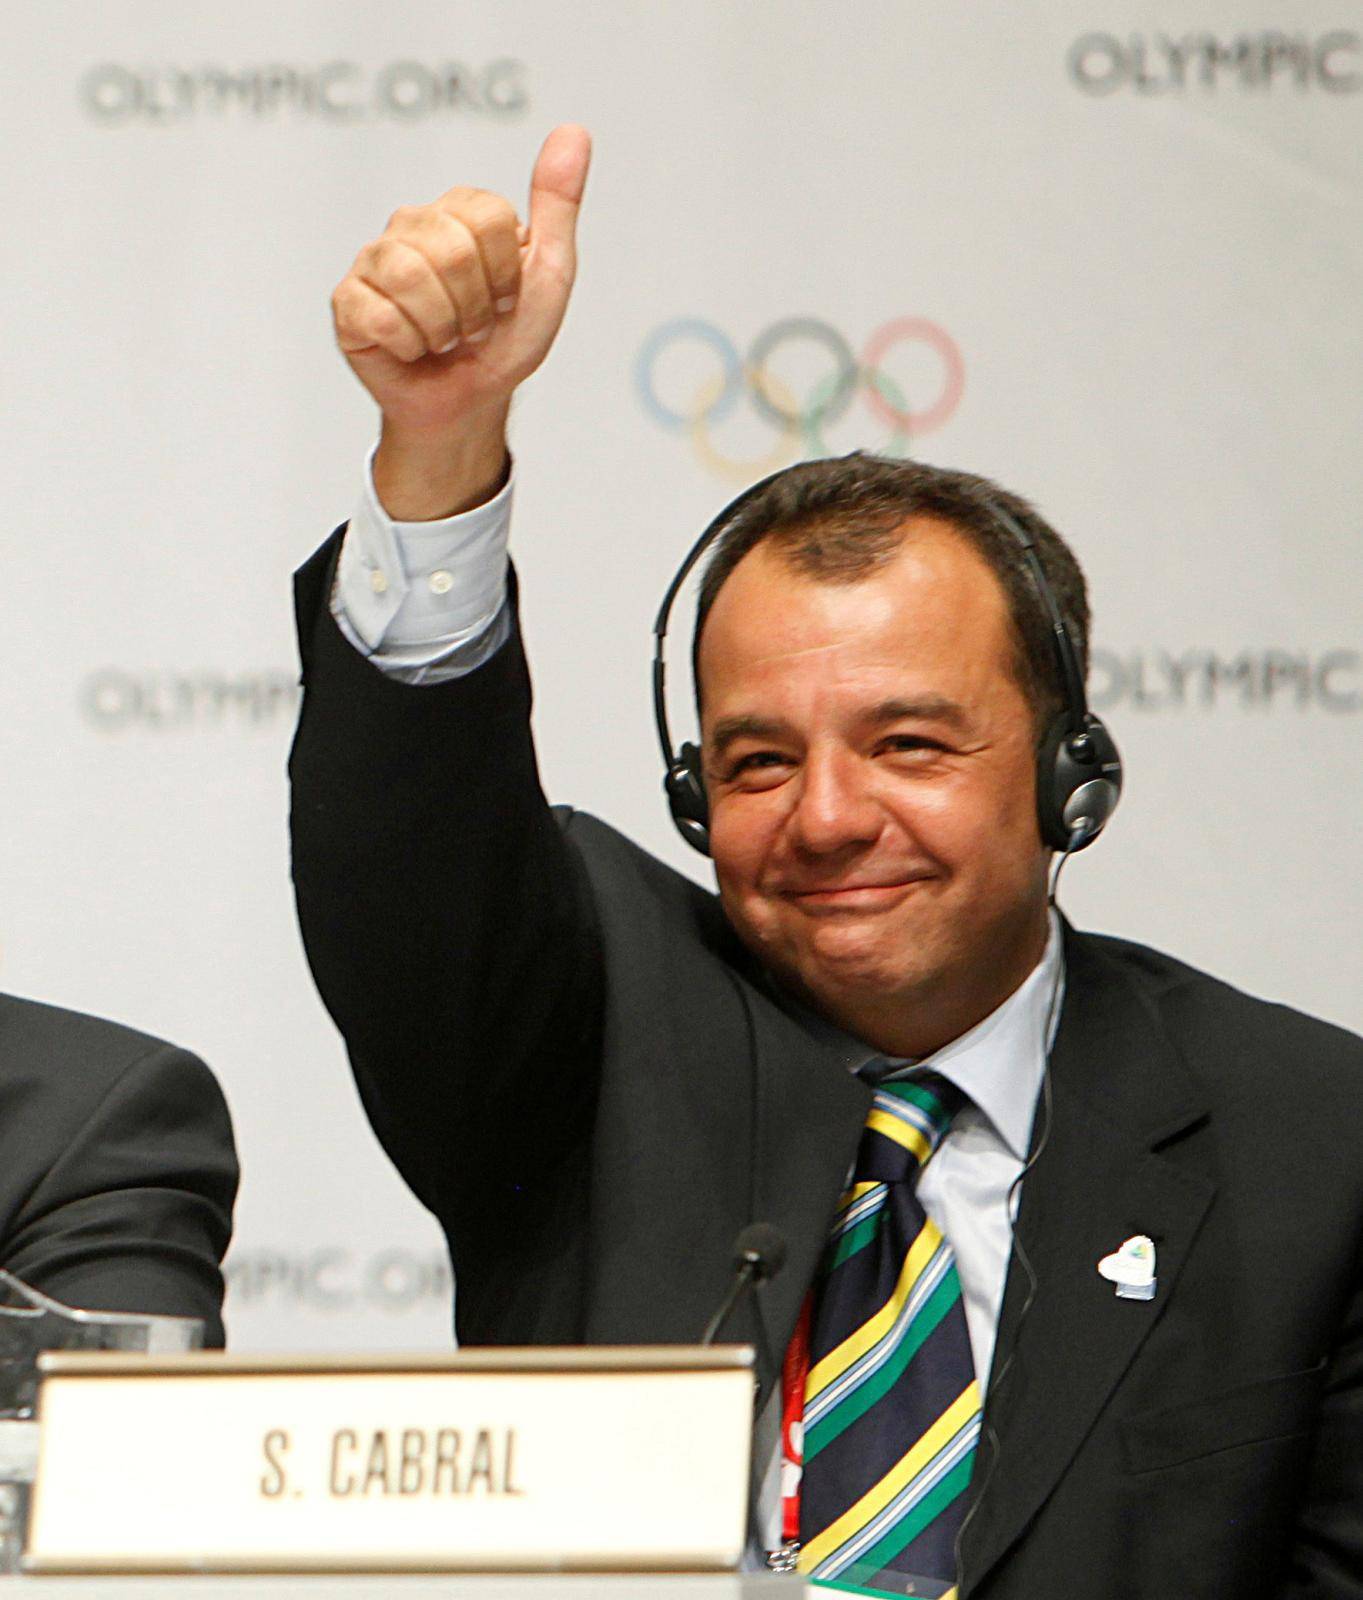 FILE PHOTO: Rio de Janeiro Governor Cabral celebrates during a news conference following the signing of the host city contract after Rio de Janeiro was announced as the winning city bid for the 2016 Olympic Games at the 121st IOC session in Copenhagen